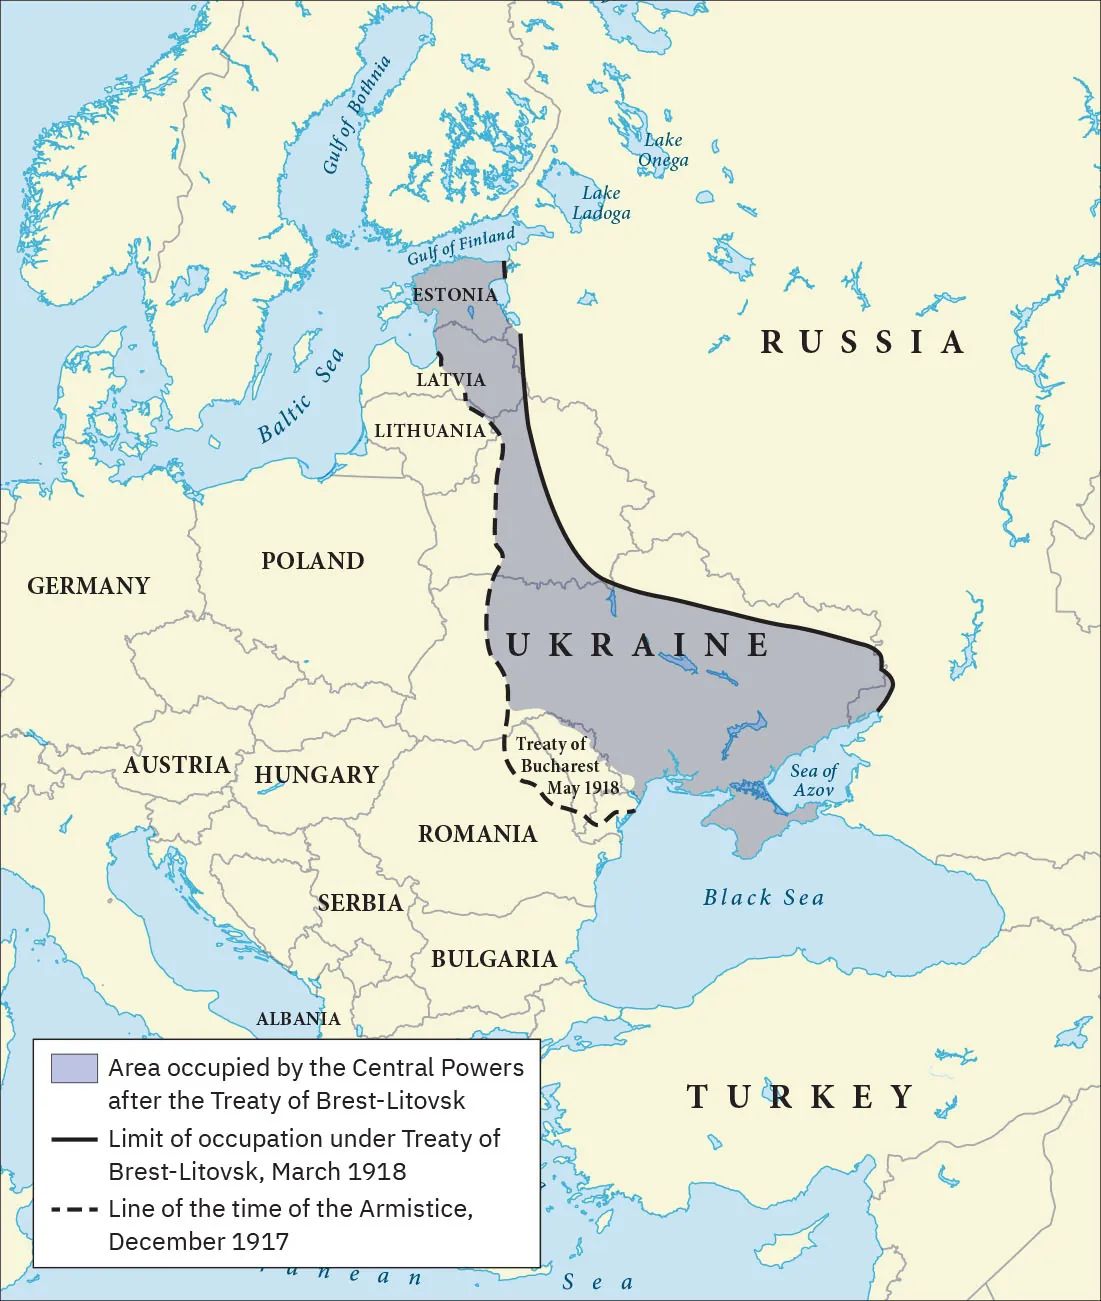 This is a map of Europe showing the territory impacted by the Central Powers after the Treaty of Brest-Litovsk. A line is labeled Limit of occupation under Treaty of Brest-Litovsk, March 1918. It runs from the eastern border of Estonia, going south and then turning east to cut through Ukraine and wrap around it to end at the Sea of Azov. Another line is labeled Line of the time of the Armistice, December 1917. It starts at the Baltic Sea, runs through the middle of Latvia, heading south and bulging out before ending at the Black Sea. Most of the area in between these two lines is shaded and labeled Area occupied by the Central Powers after the Treaty of Brest-Litovsk. The southwestern corner of the area is not shaded and labeled Treaty of Bucharest May 1918.